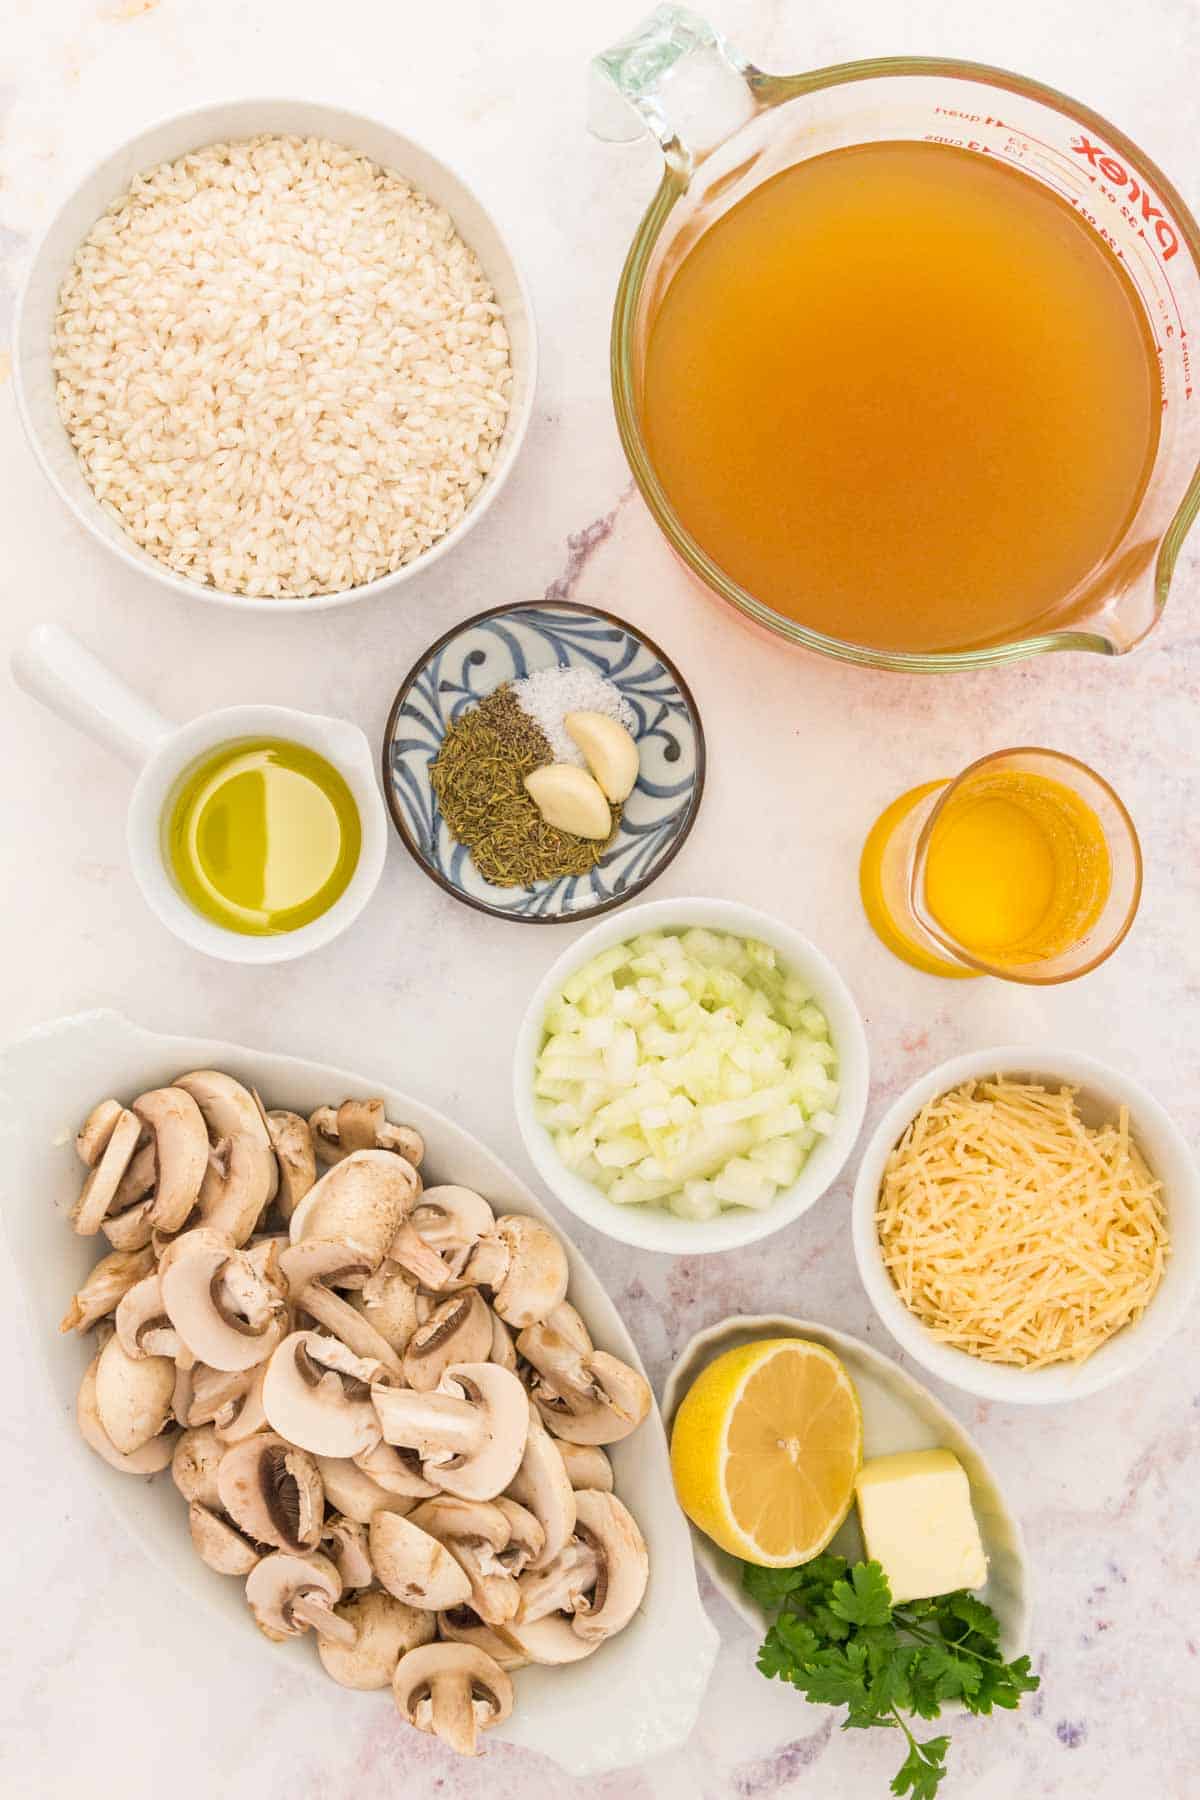 Ingredients for Instant Pot mushroom risotto.